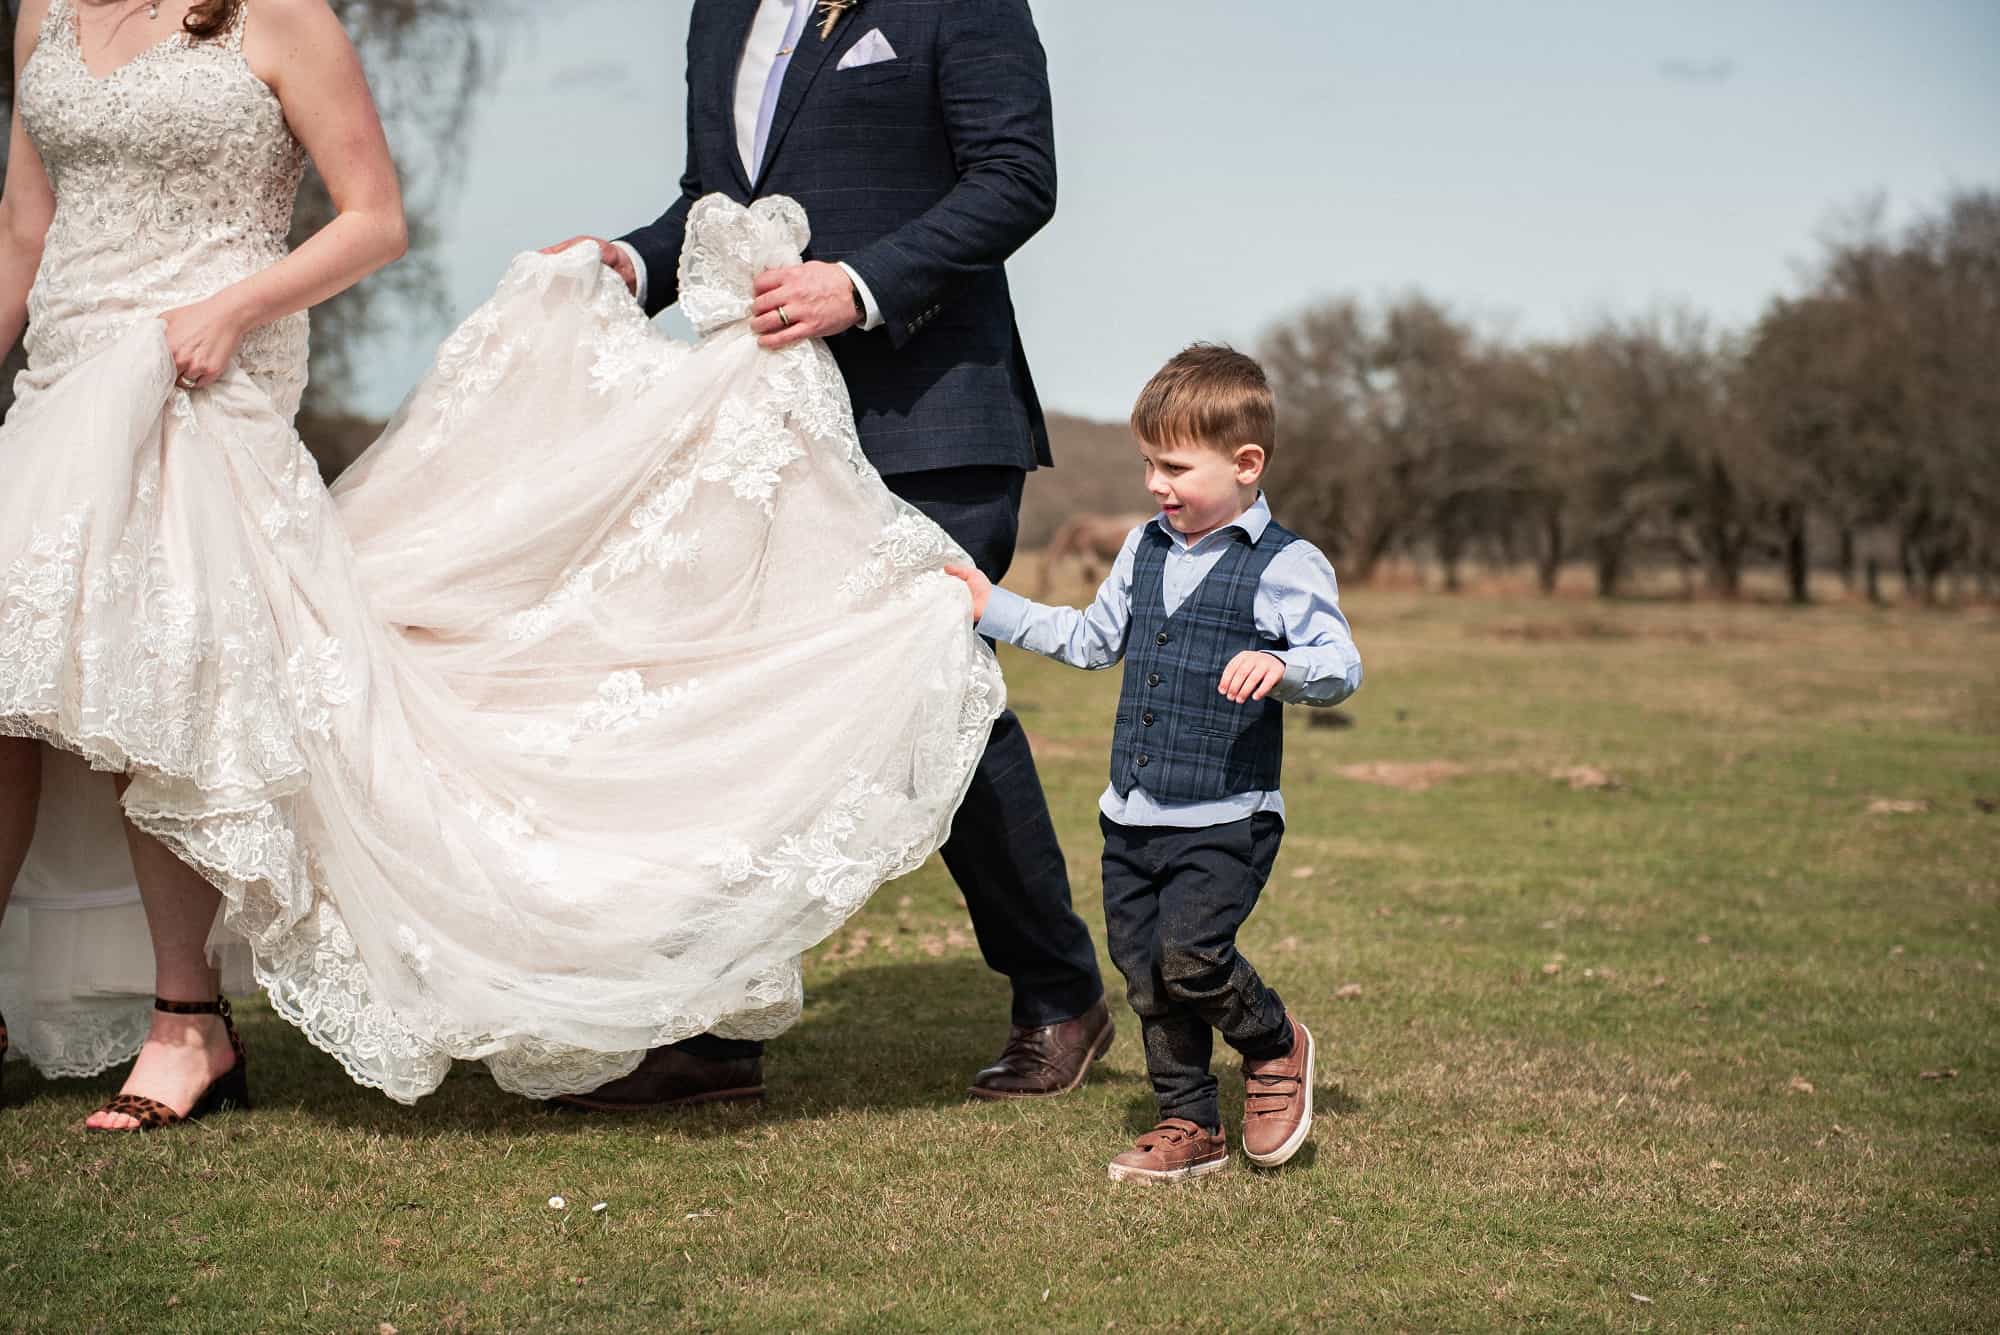 Groom holding brides dress on their wedding day with their little boy helping hold the dress